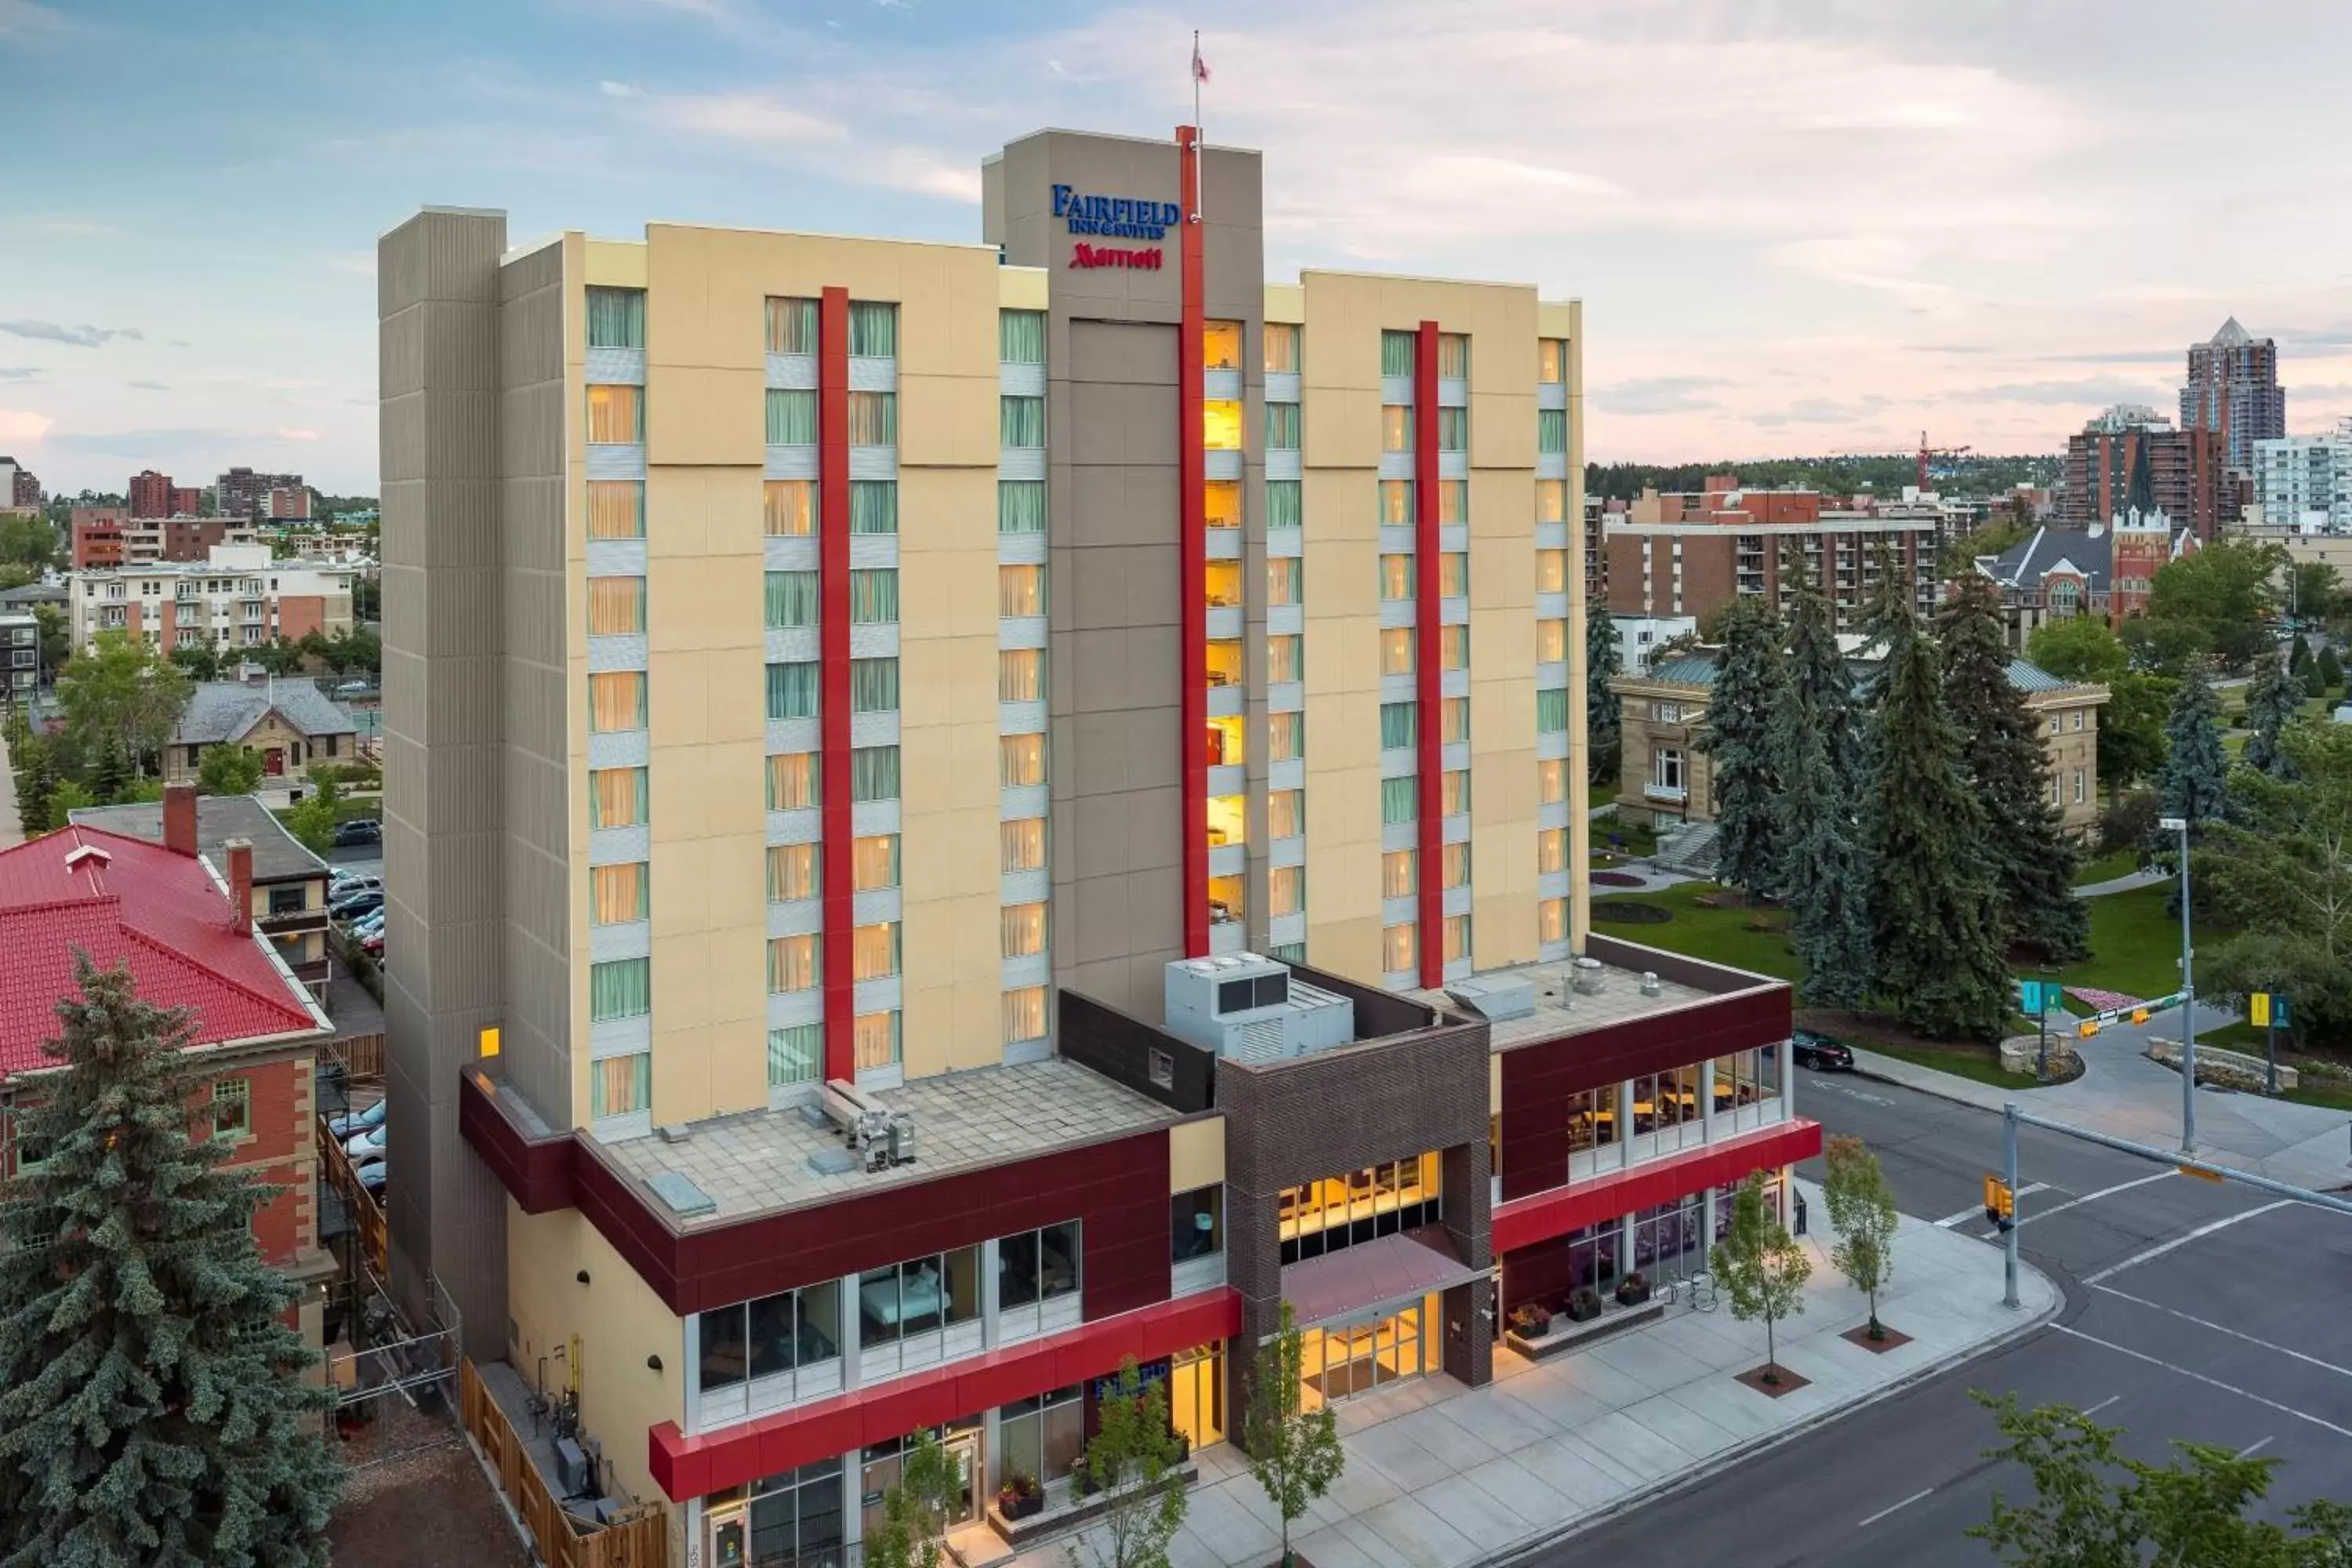 Property building in Fairfield Inn & Suites by Marriott Calgary Downtown